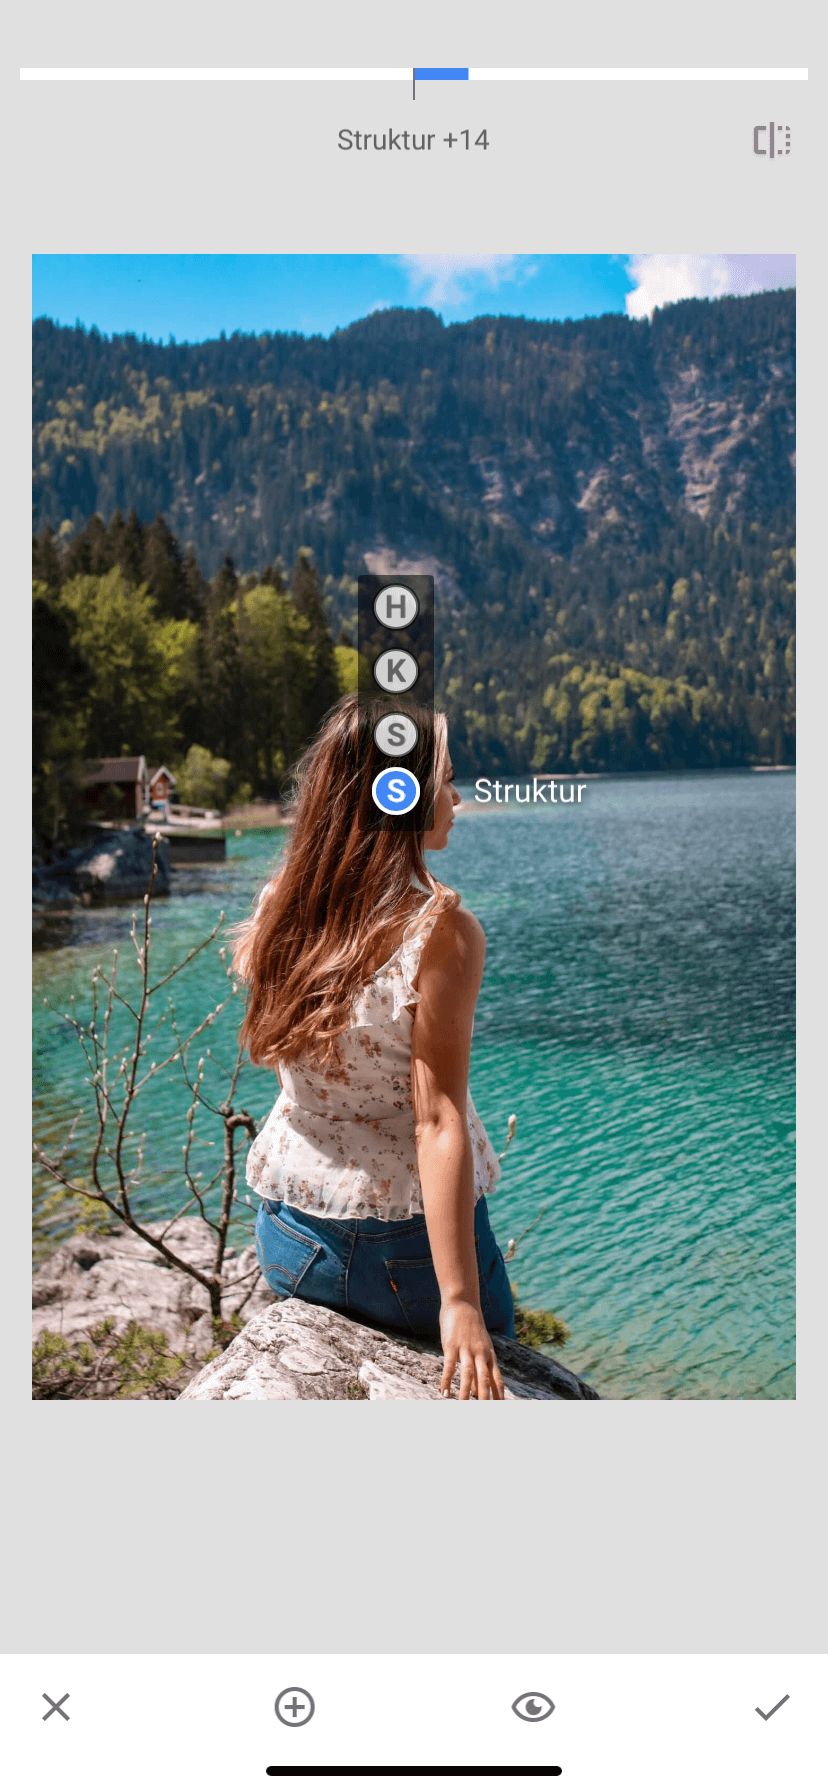 Image editing app - 6 apps for the perfect image (filter, color, focus, etc.)